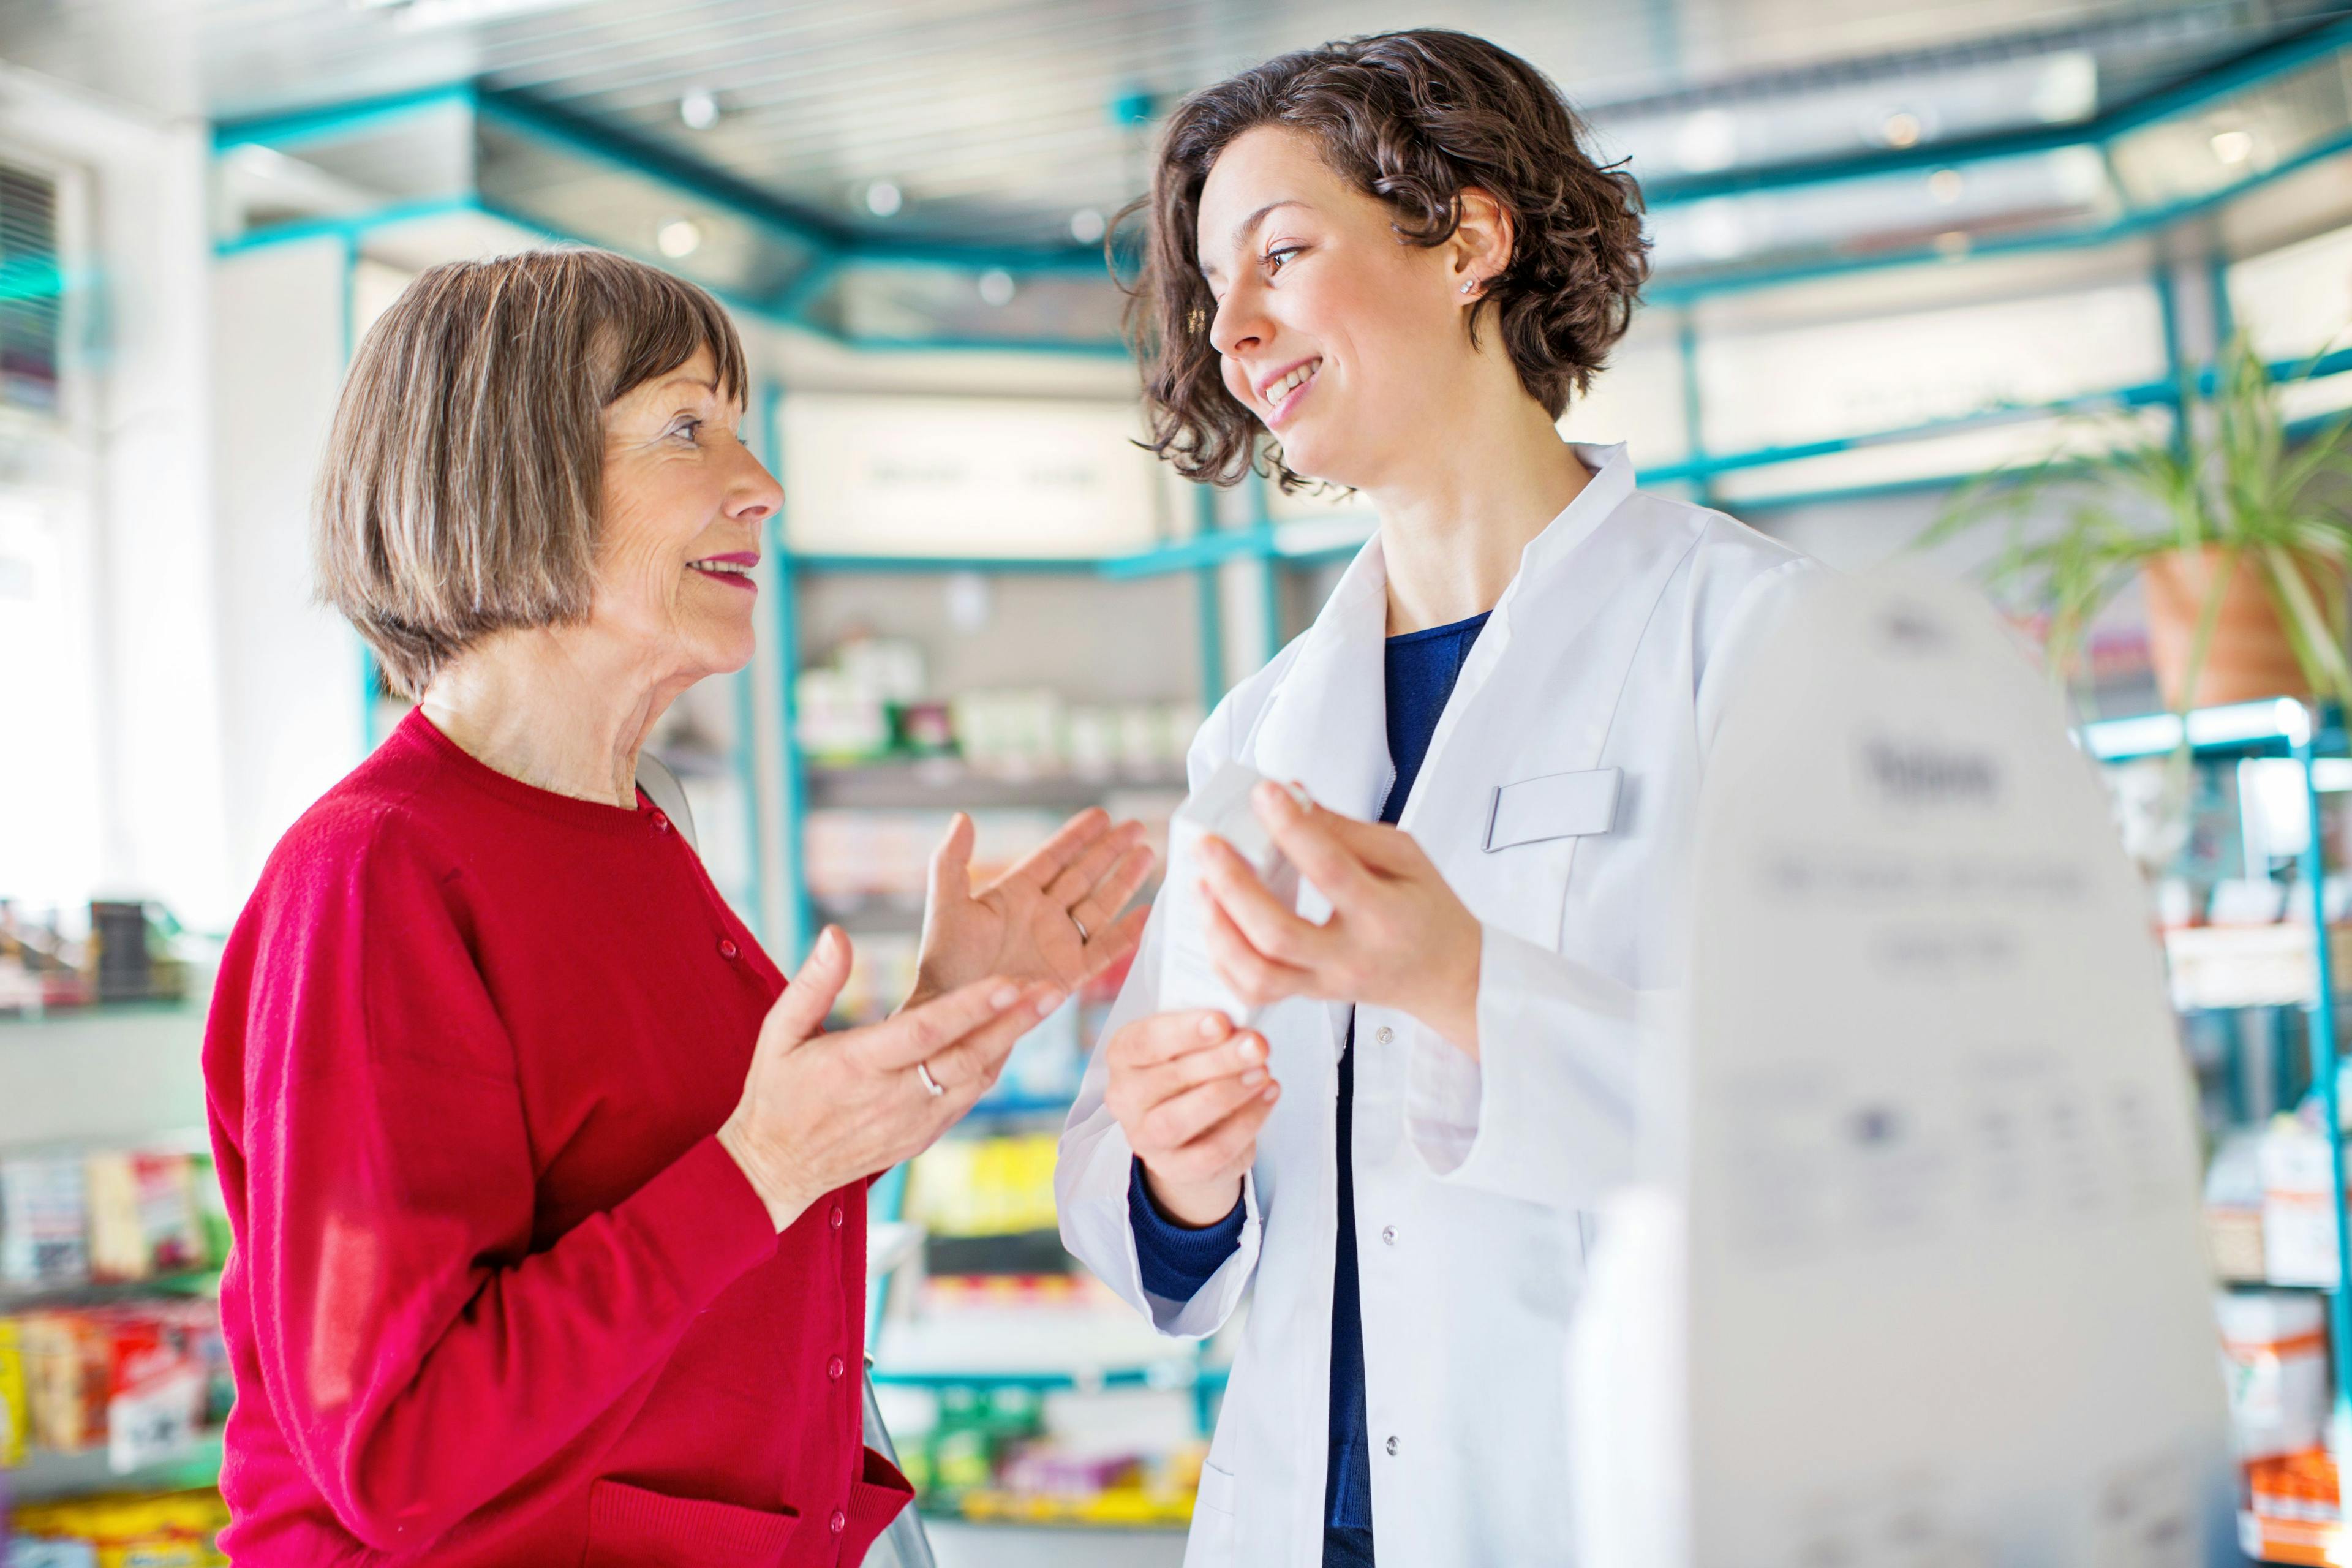 Diabetes Mortality Has Increased, But Pharmacists Can Help 